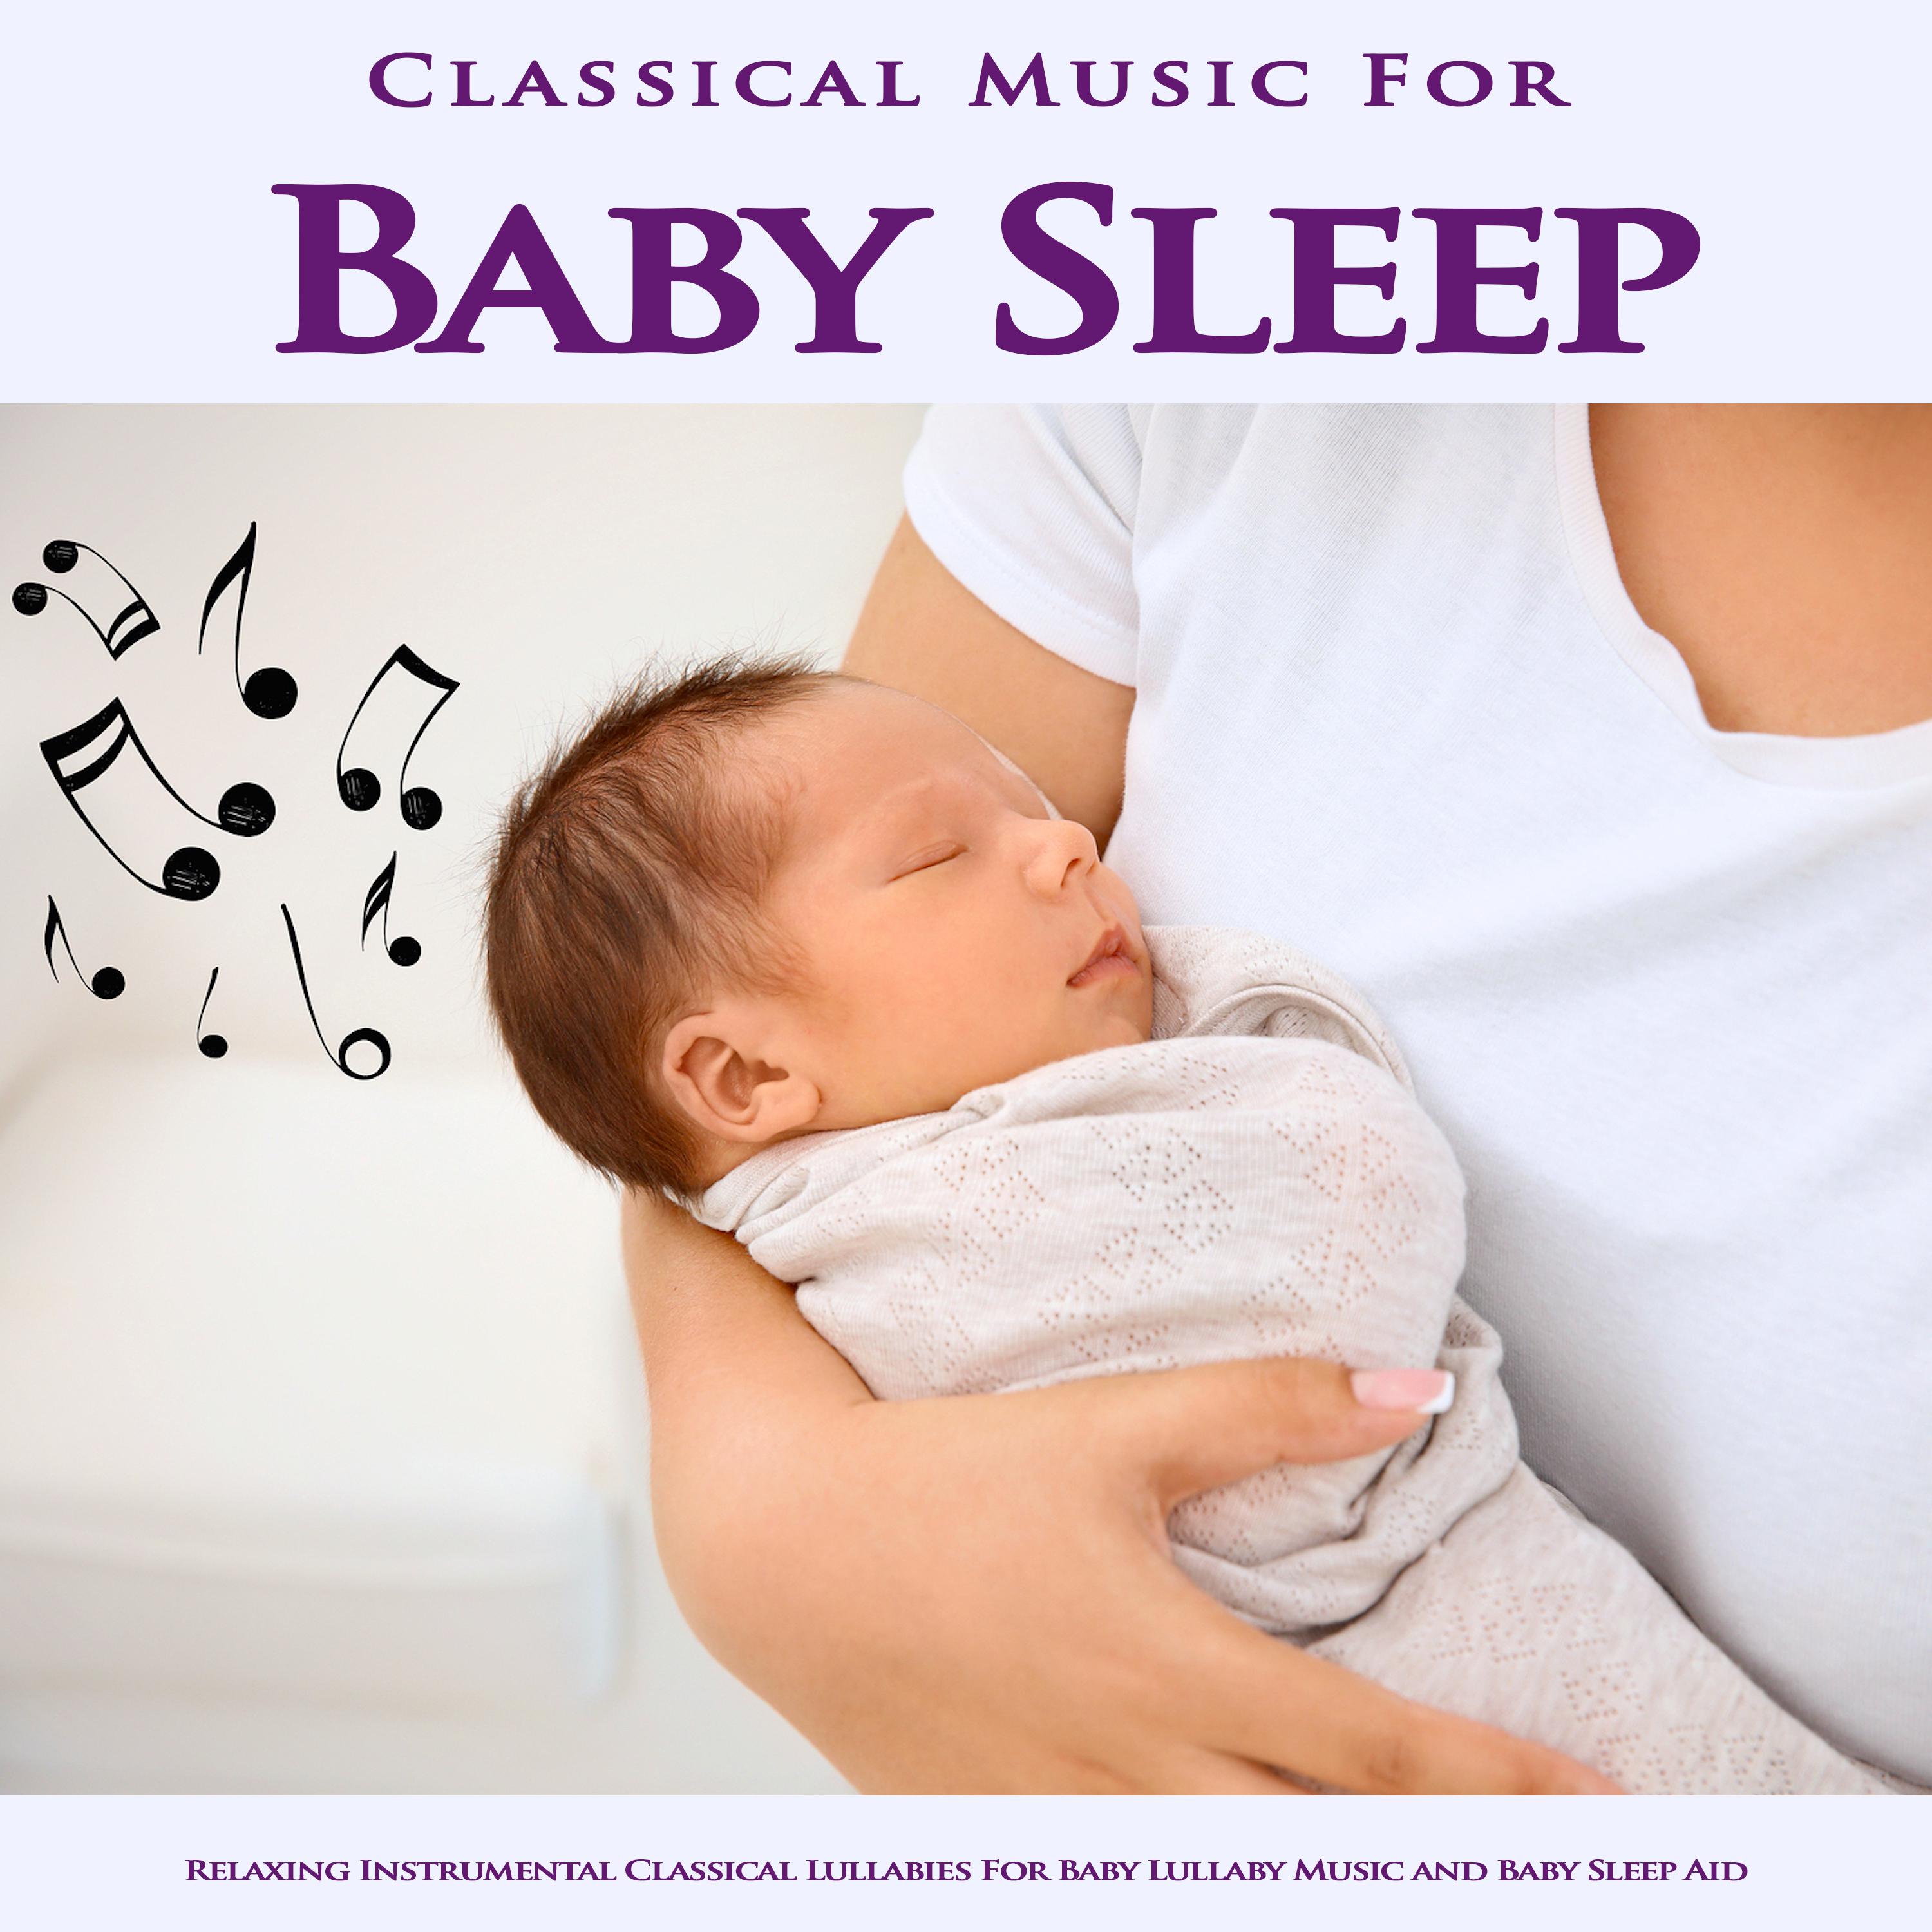 Song Without Words - Mendelssohn - Rain Sounds Baby Sleep Aid - Classical Baby Lullabies